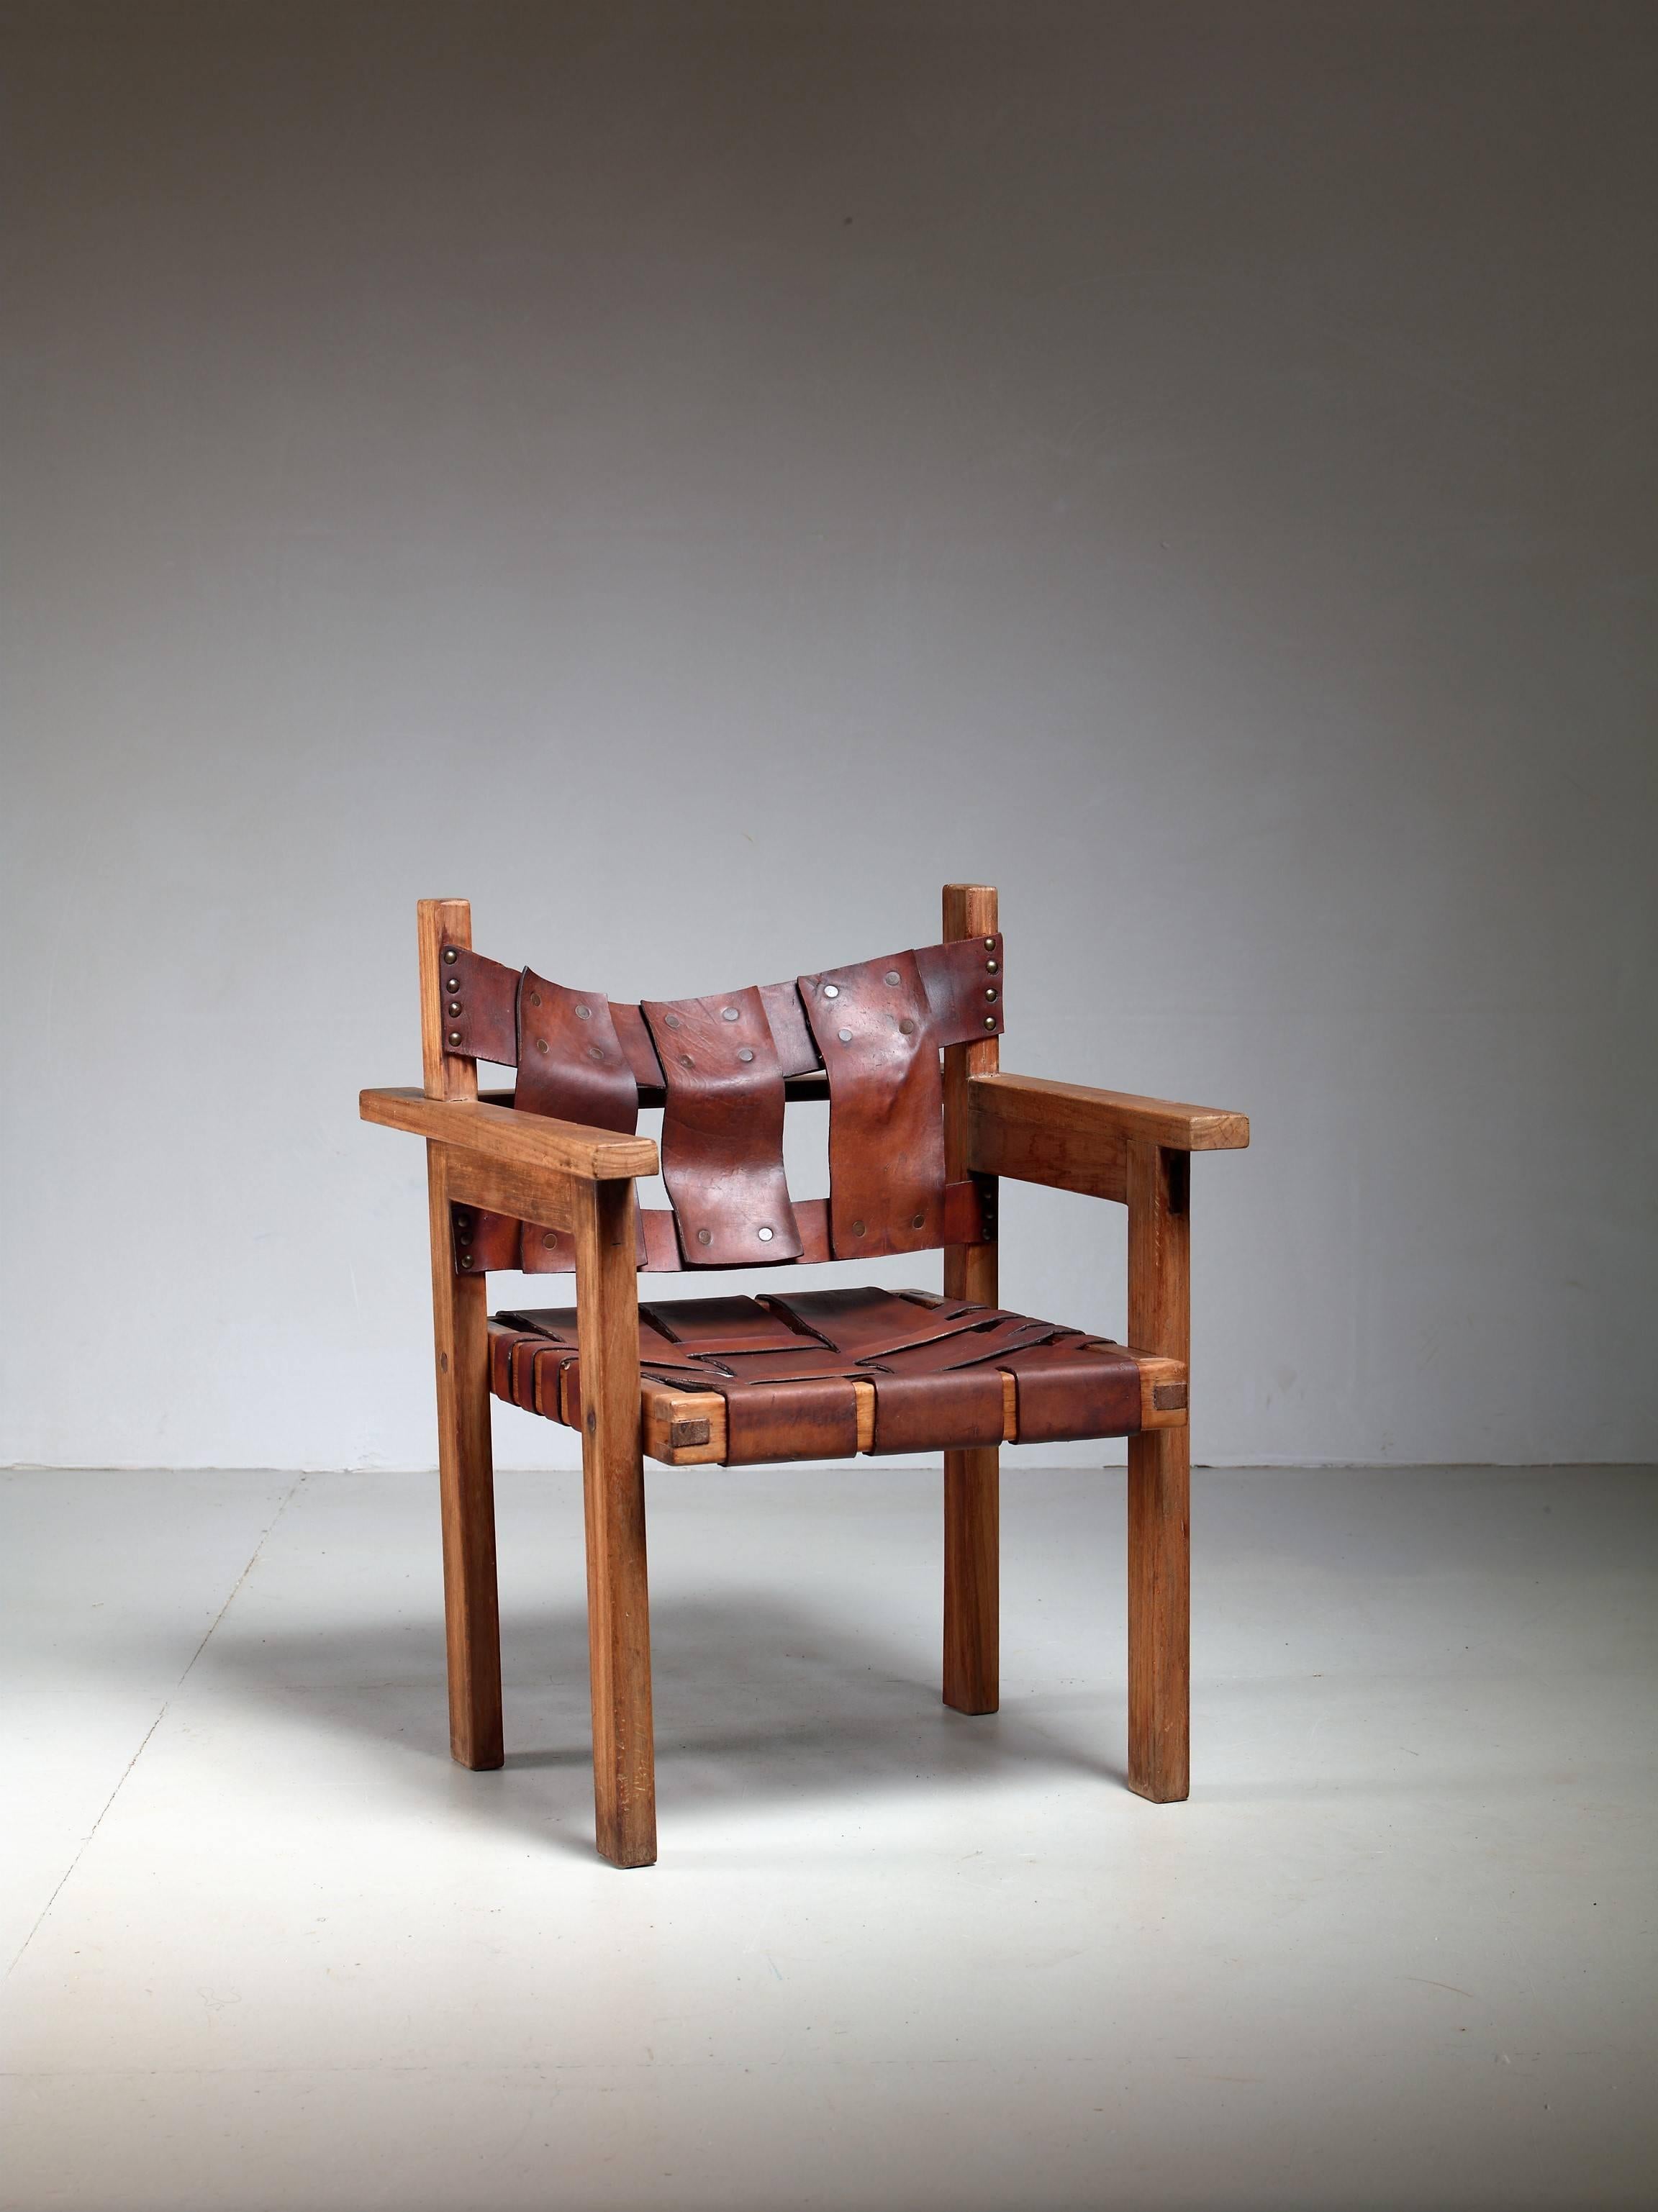 Mid-20th Century Nutwood and leather modernist chair, France, 1940s For Sale